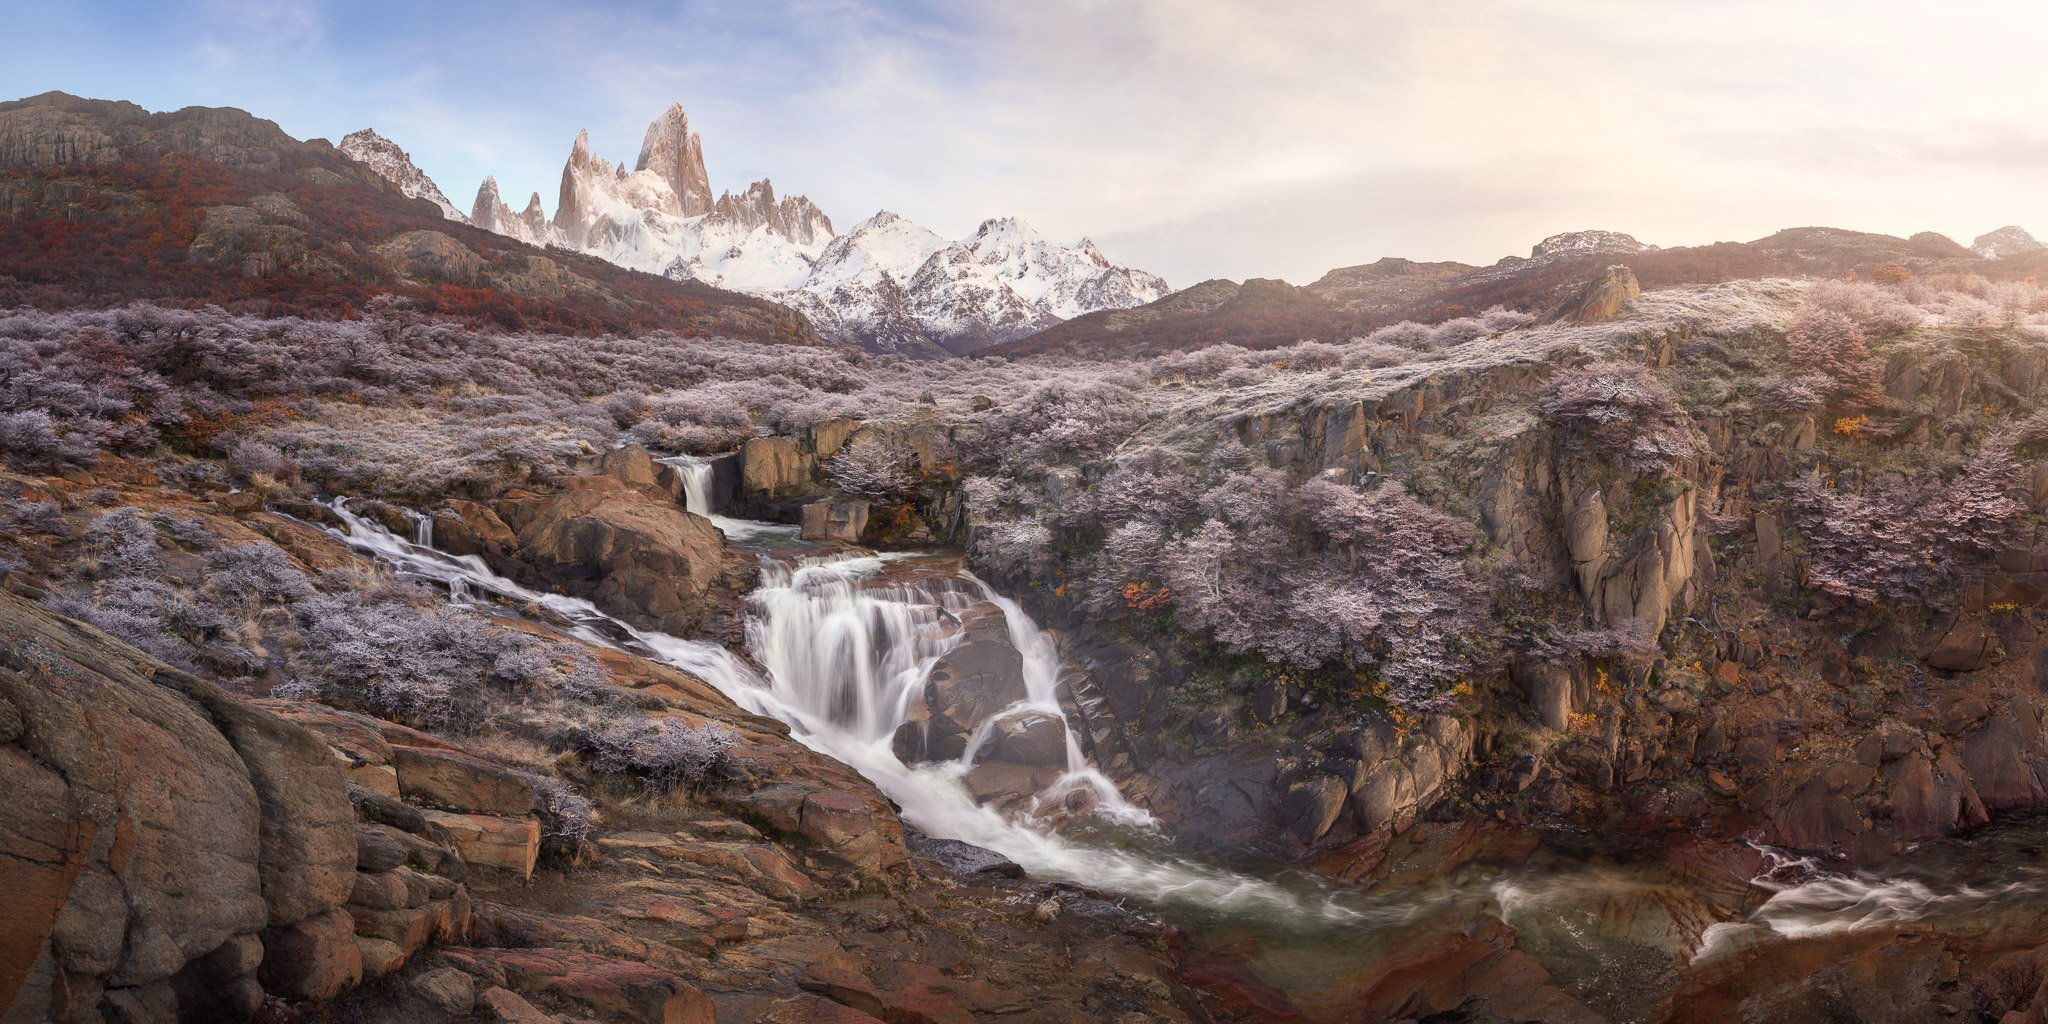 america, andes, argentina, autumn, beautiful, blue, canyon, cascada, cascade, chalten, el, fitz, fitzroy, frost, glaciares, glacier, gorge, hiking, landmark, landscape, monte, morning, mount, mountain, national, nature, outdoor, panorama, park, patagonia,, Andrey Omelyanchuk